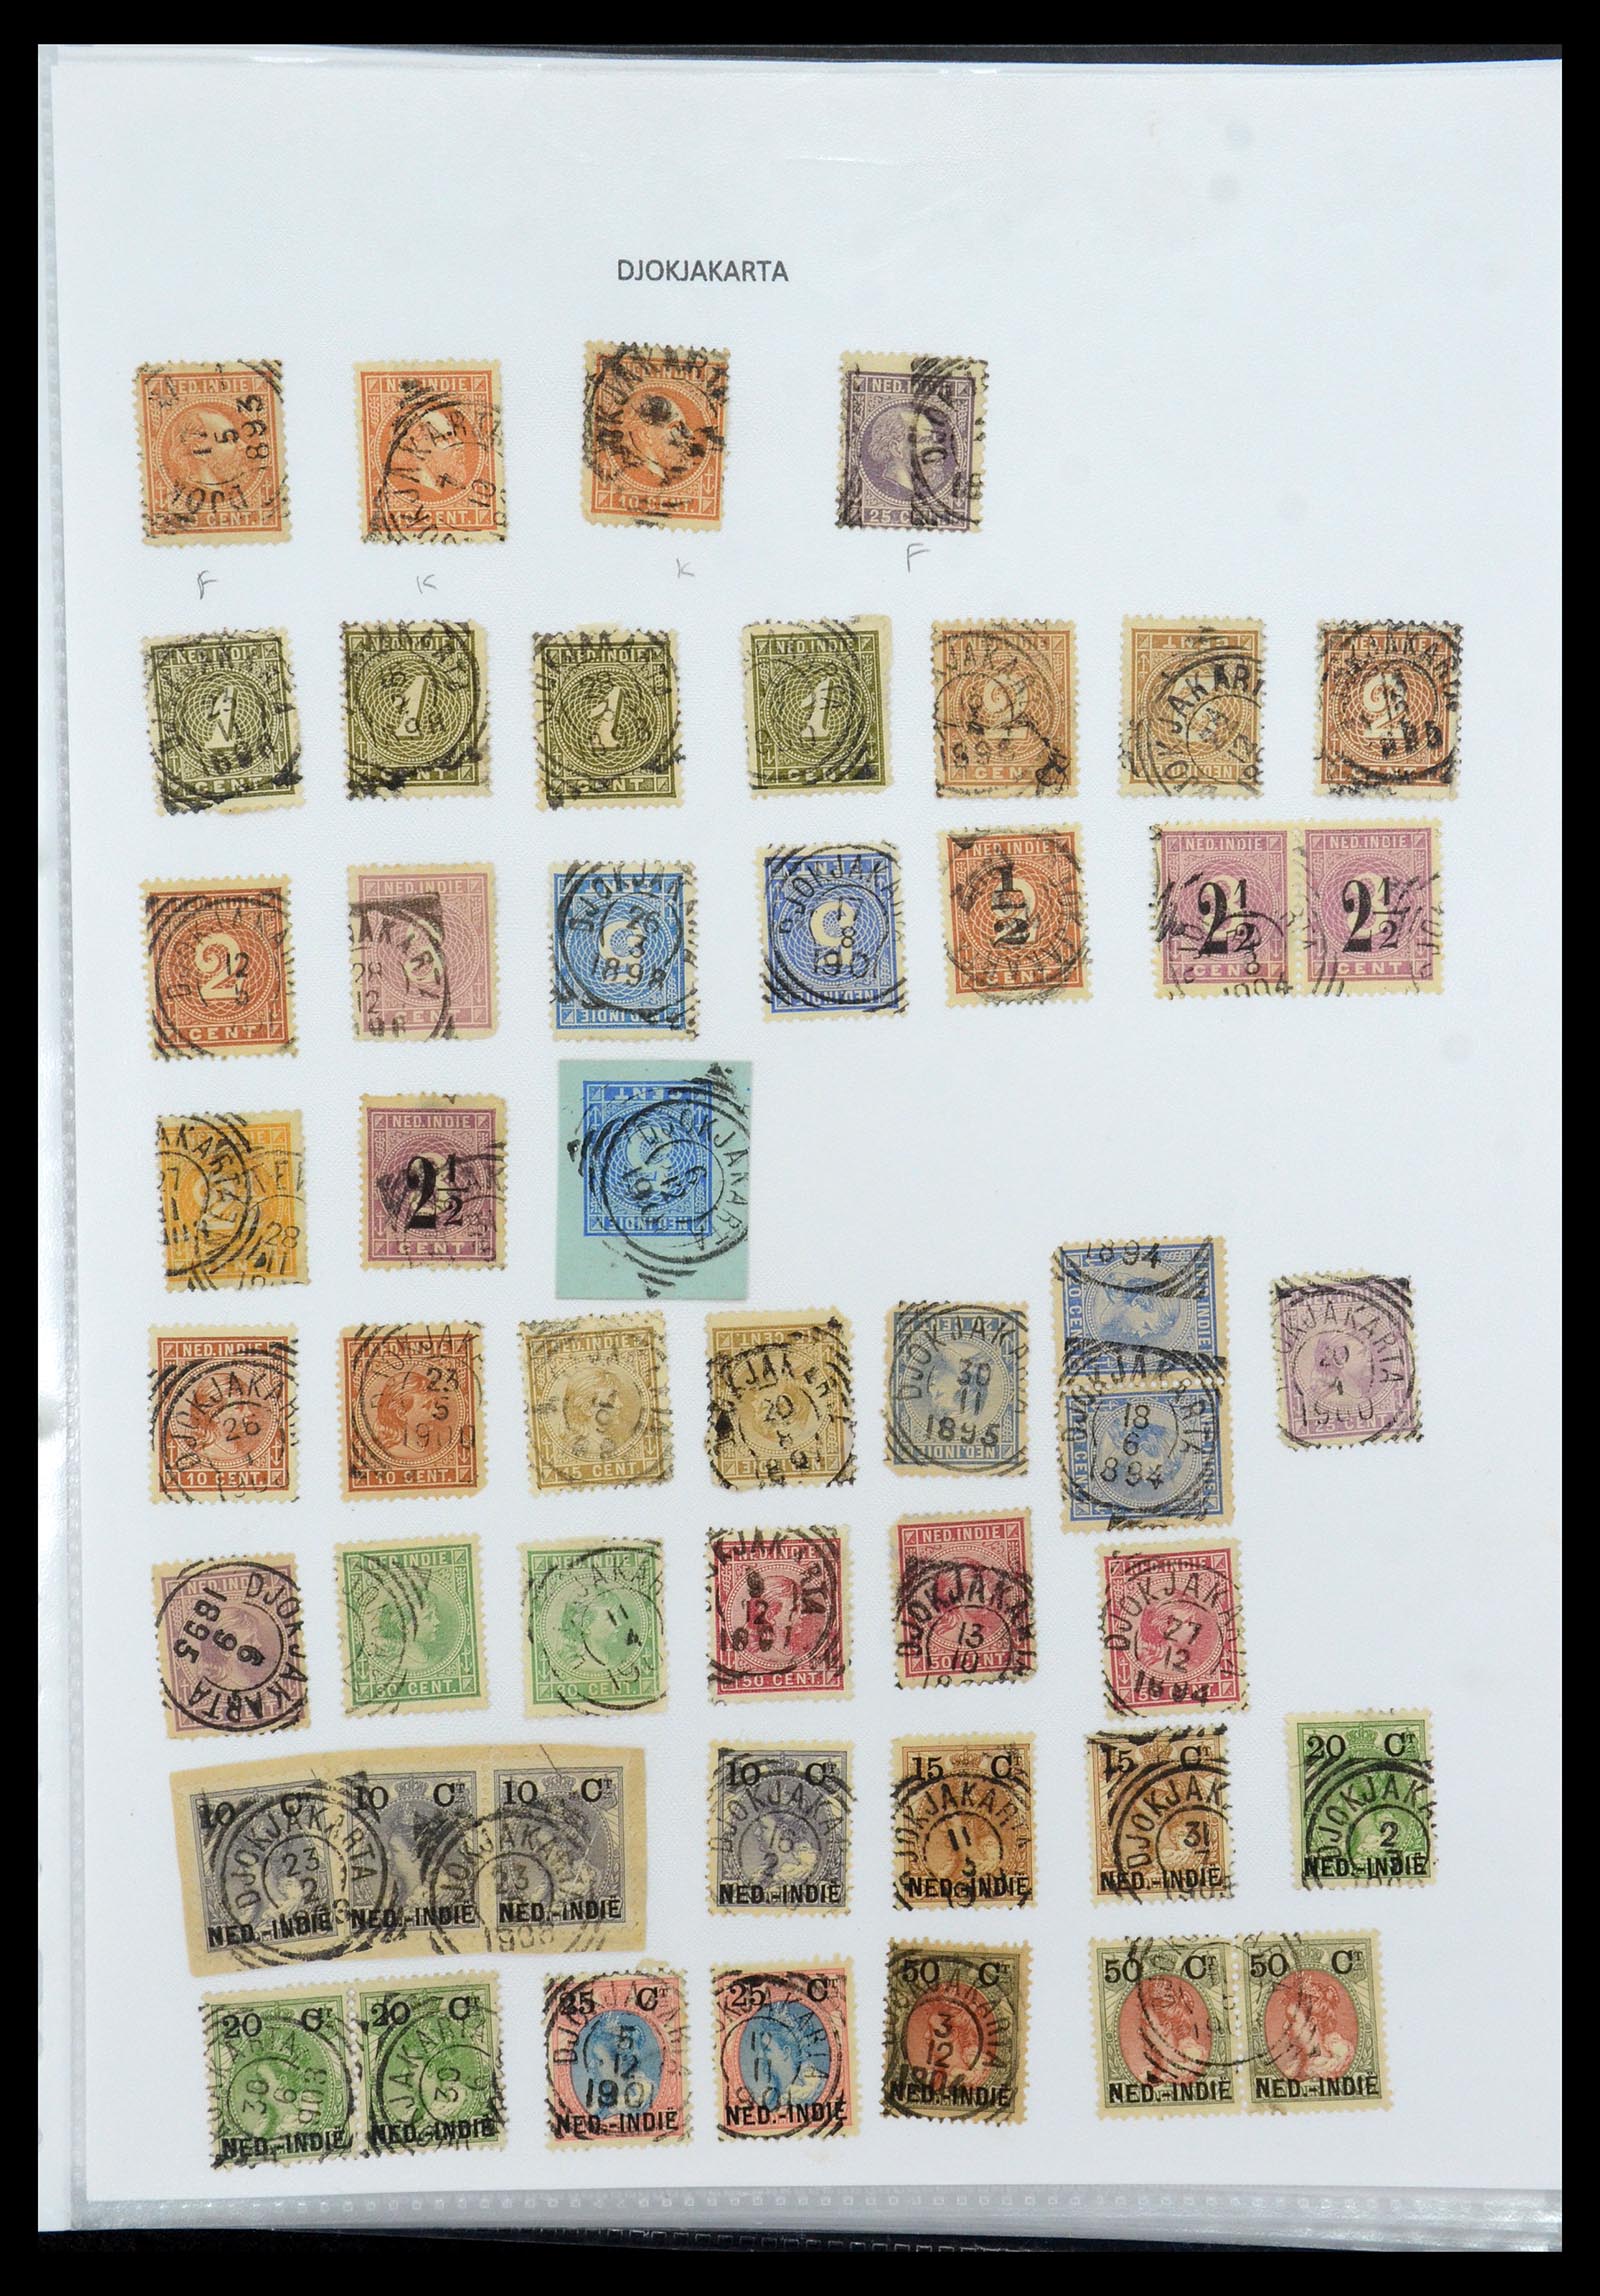 36432 047 - Stamp collection 36432 Dutch east Indies square cancels.